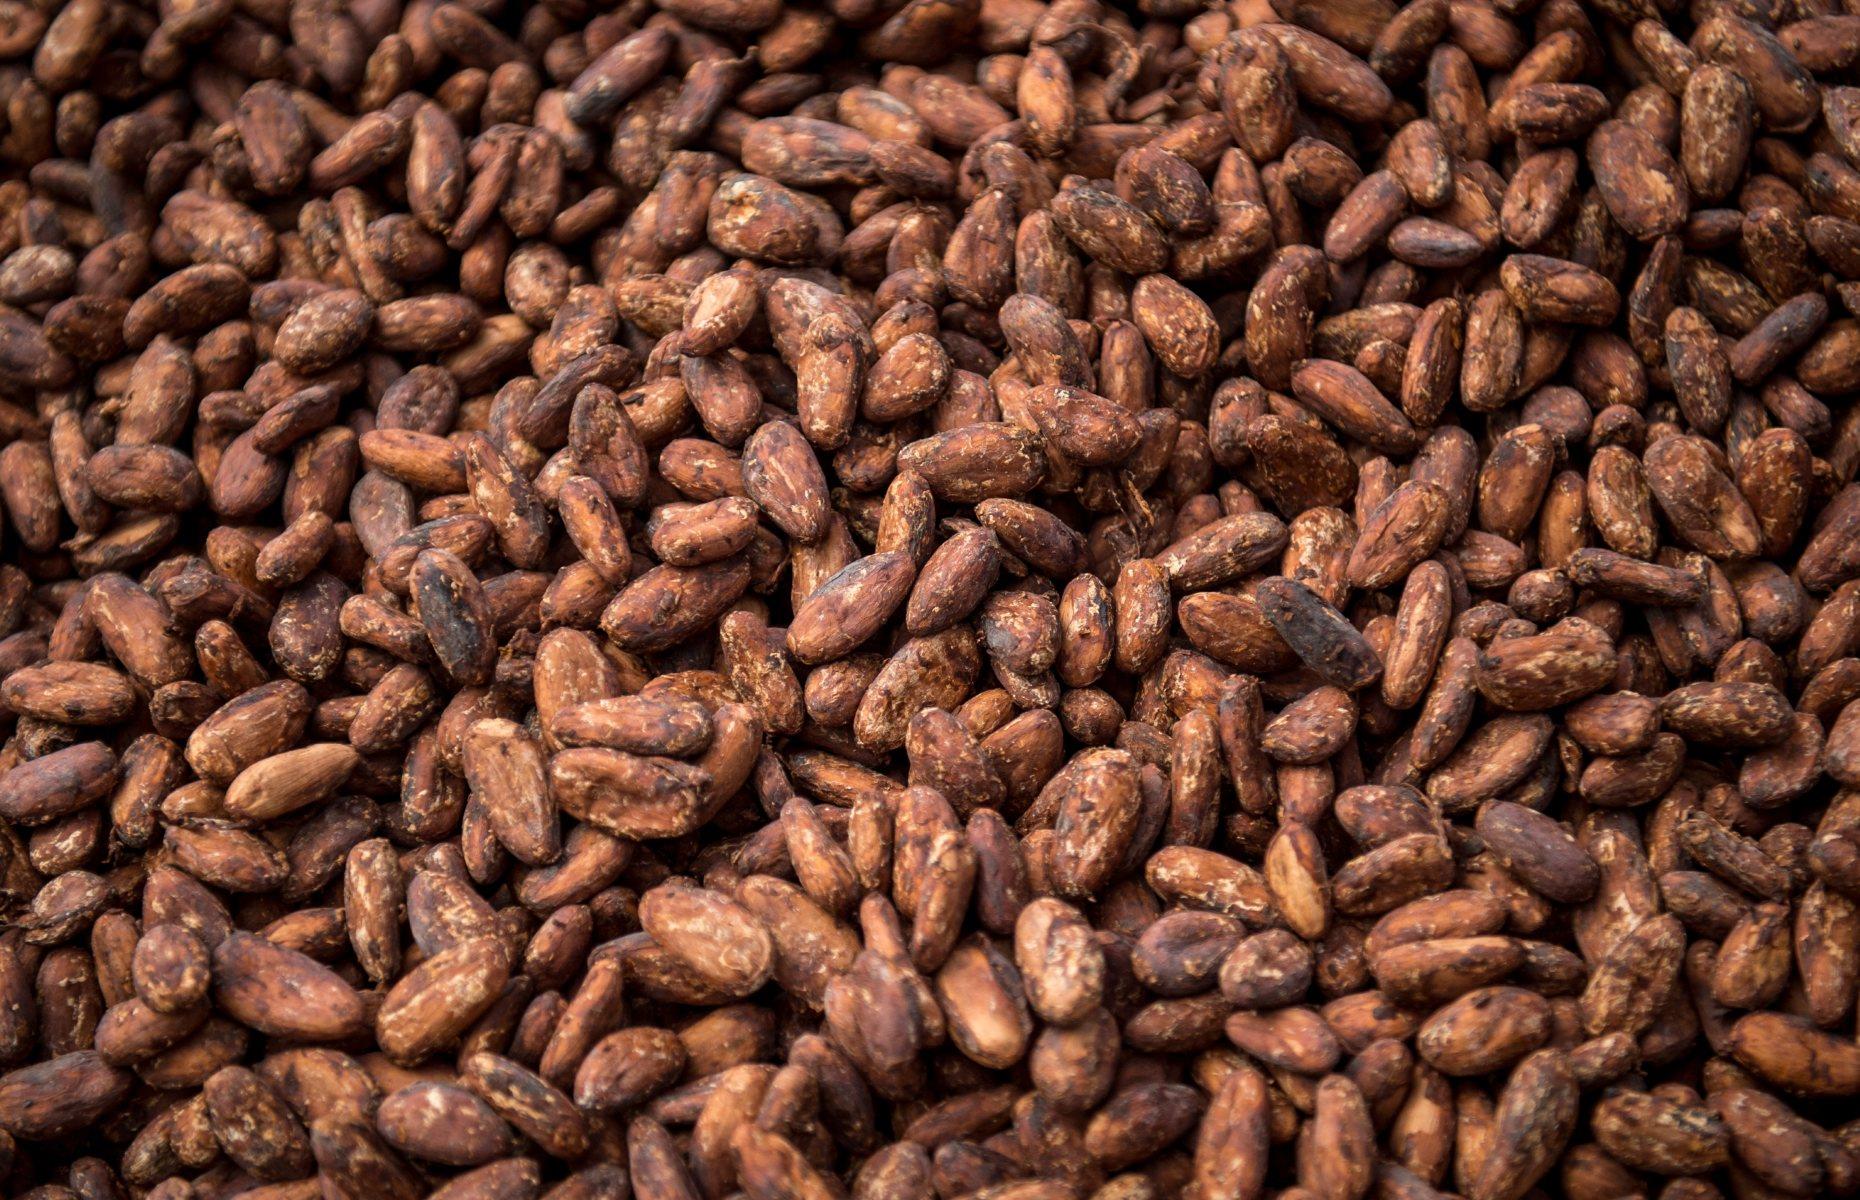 <p>There's often confusion between cocoa and cacao. The use of the former is believed to be a spelling mistake that stuck. English traders are thought to have mixed up the letters when labeling the beans for transport. Today, cacao tends to refer to the raw beans and cocoa the comforting hot drink.</p>